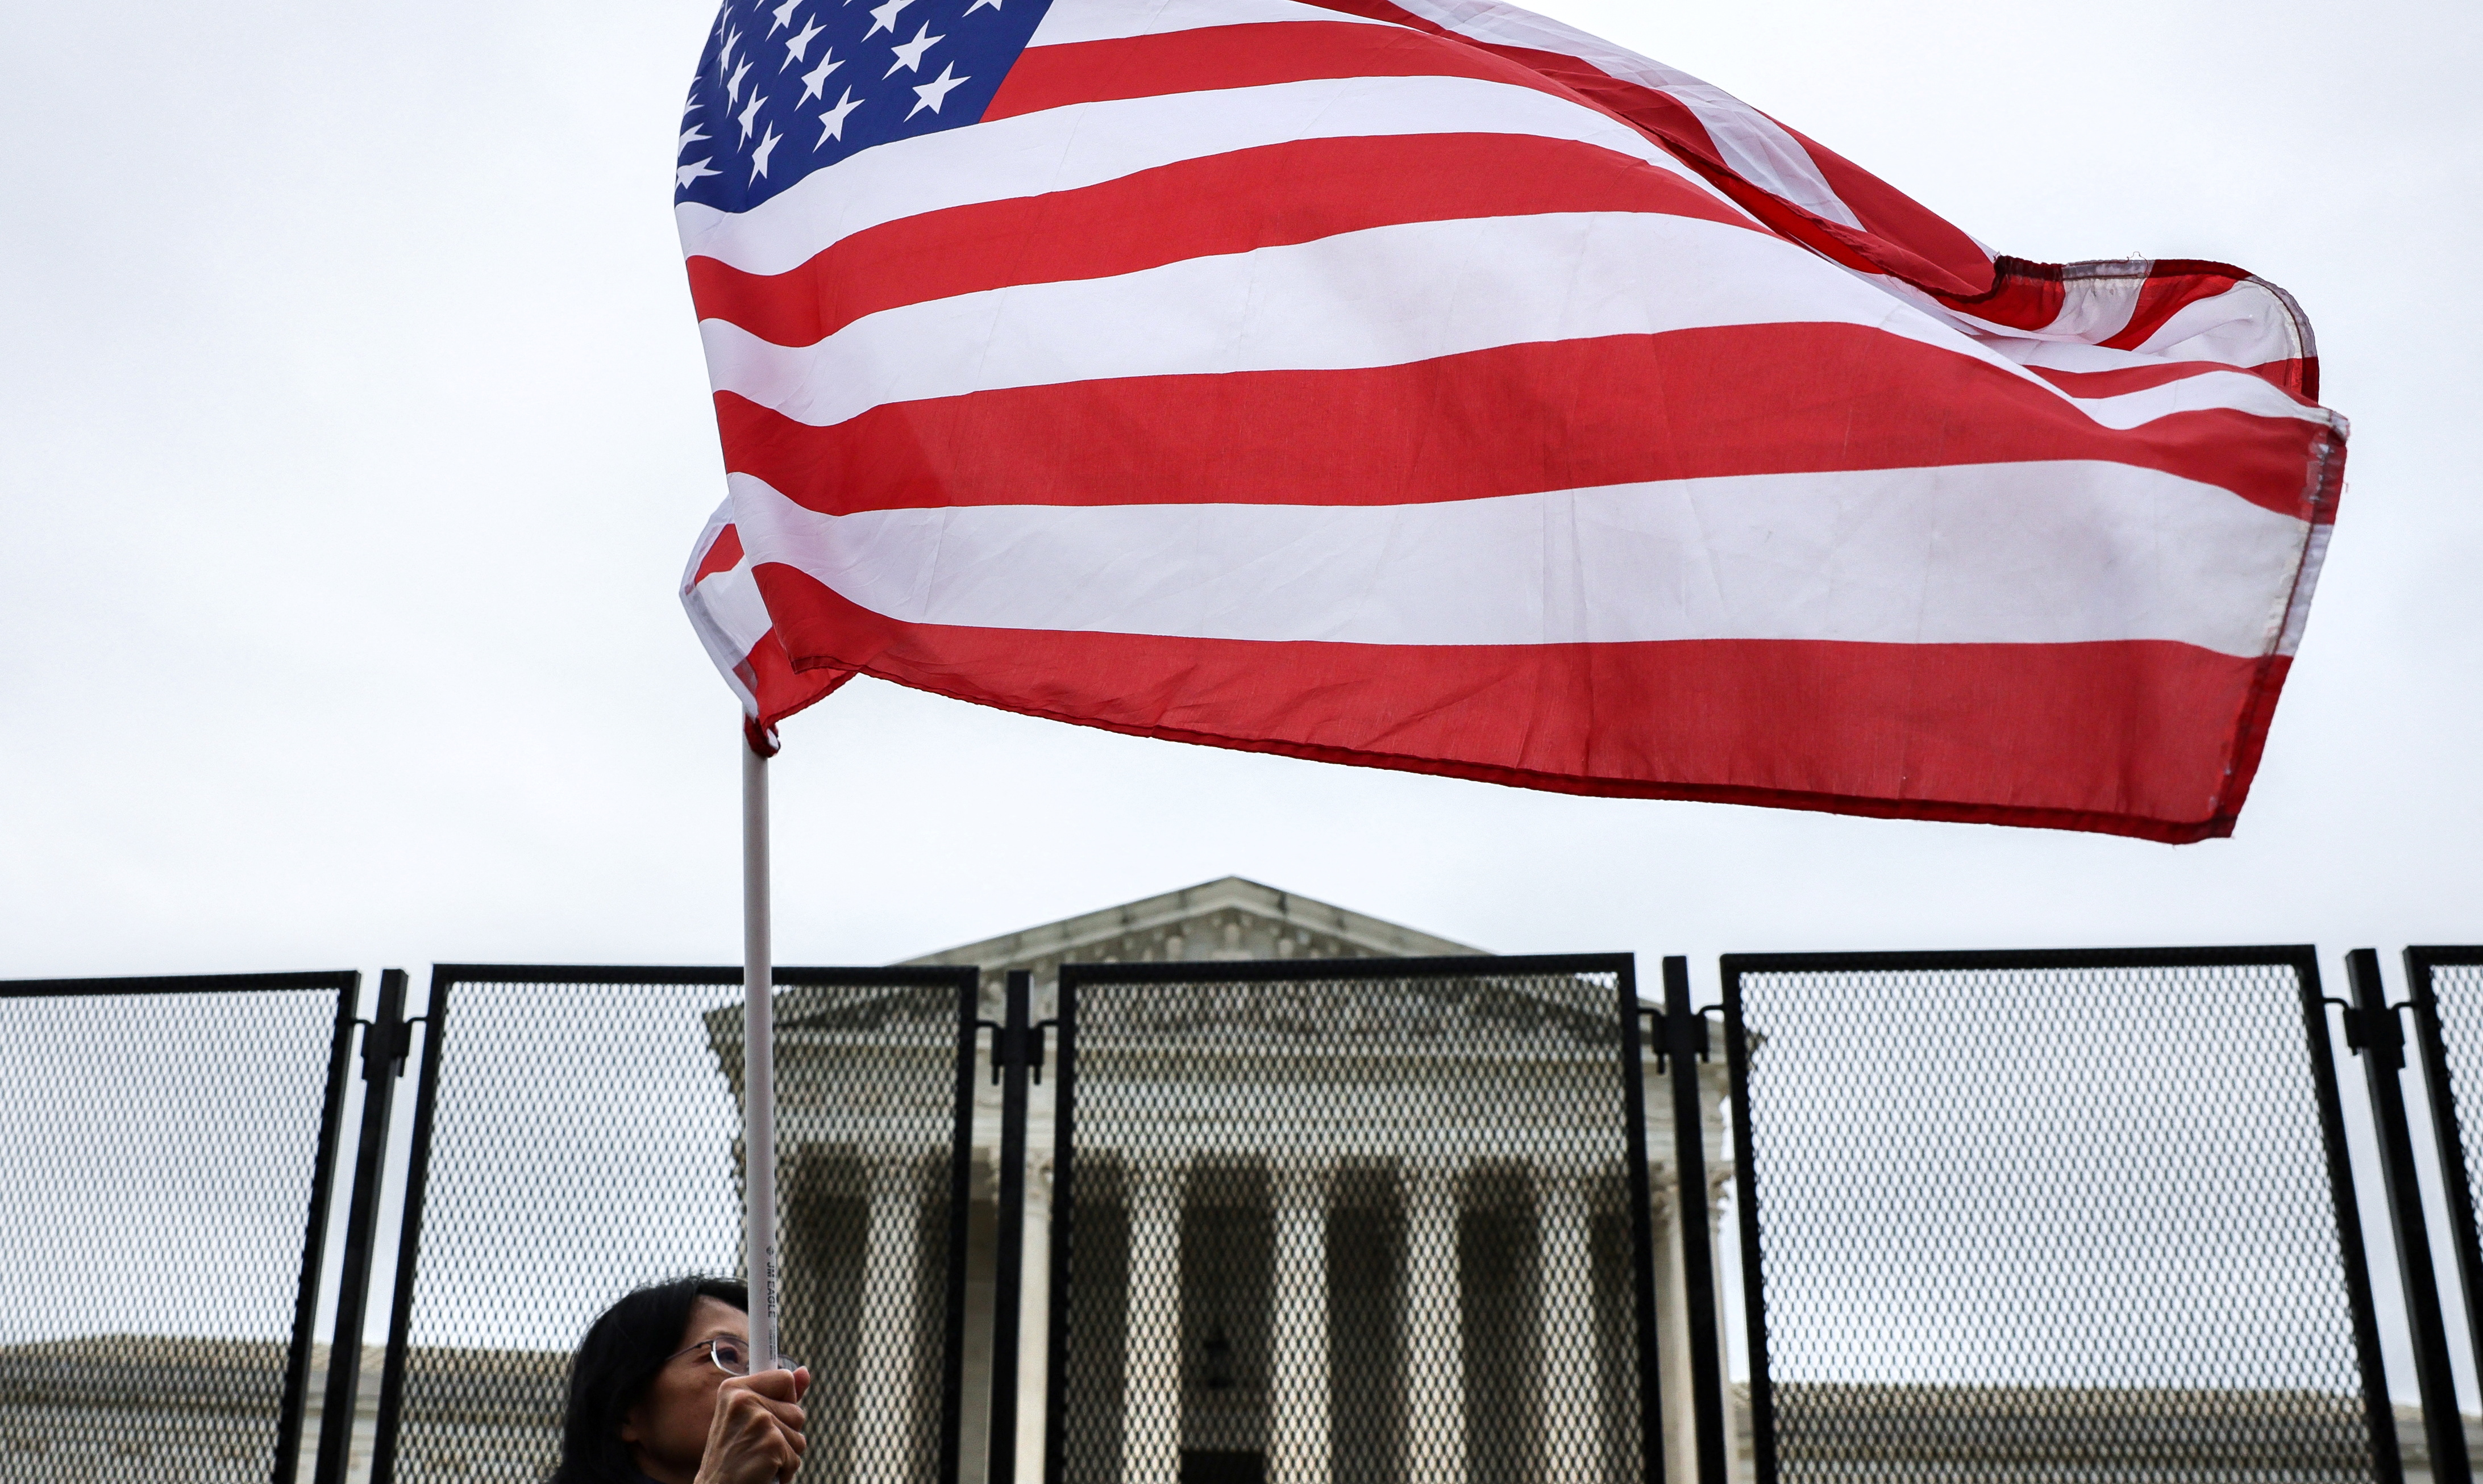 An anti-abortion protester waves a flag in front of the U.S. Supreme Court, in Washington